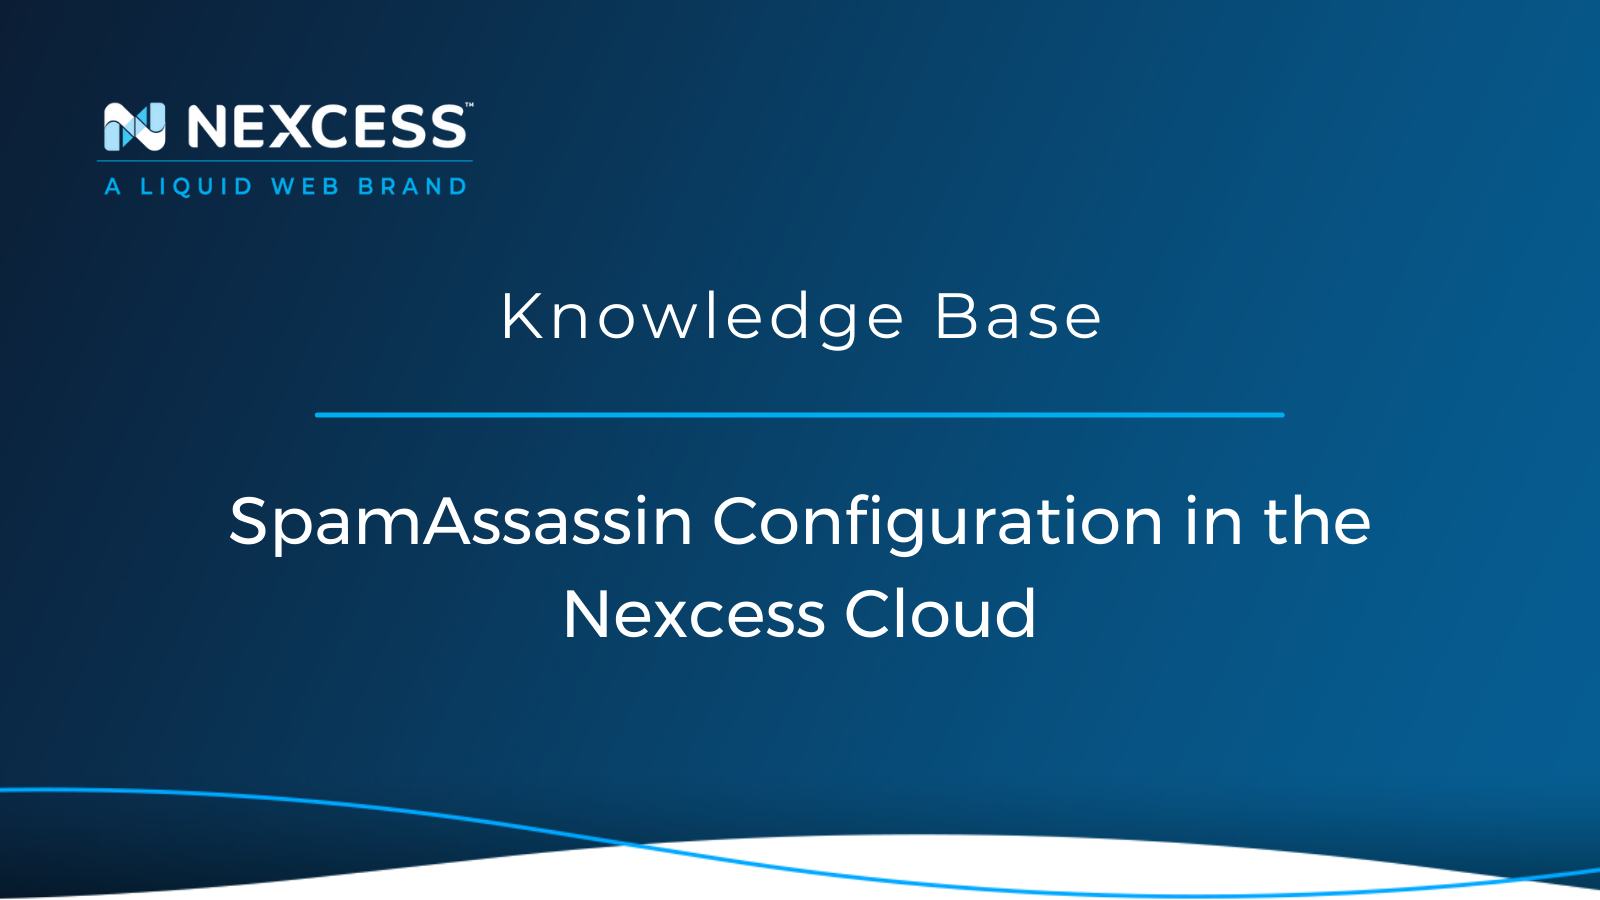 SpamAssassin Configuration in the Nexcess Cloud